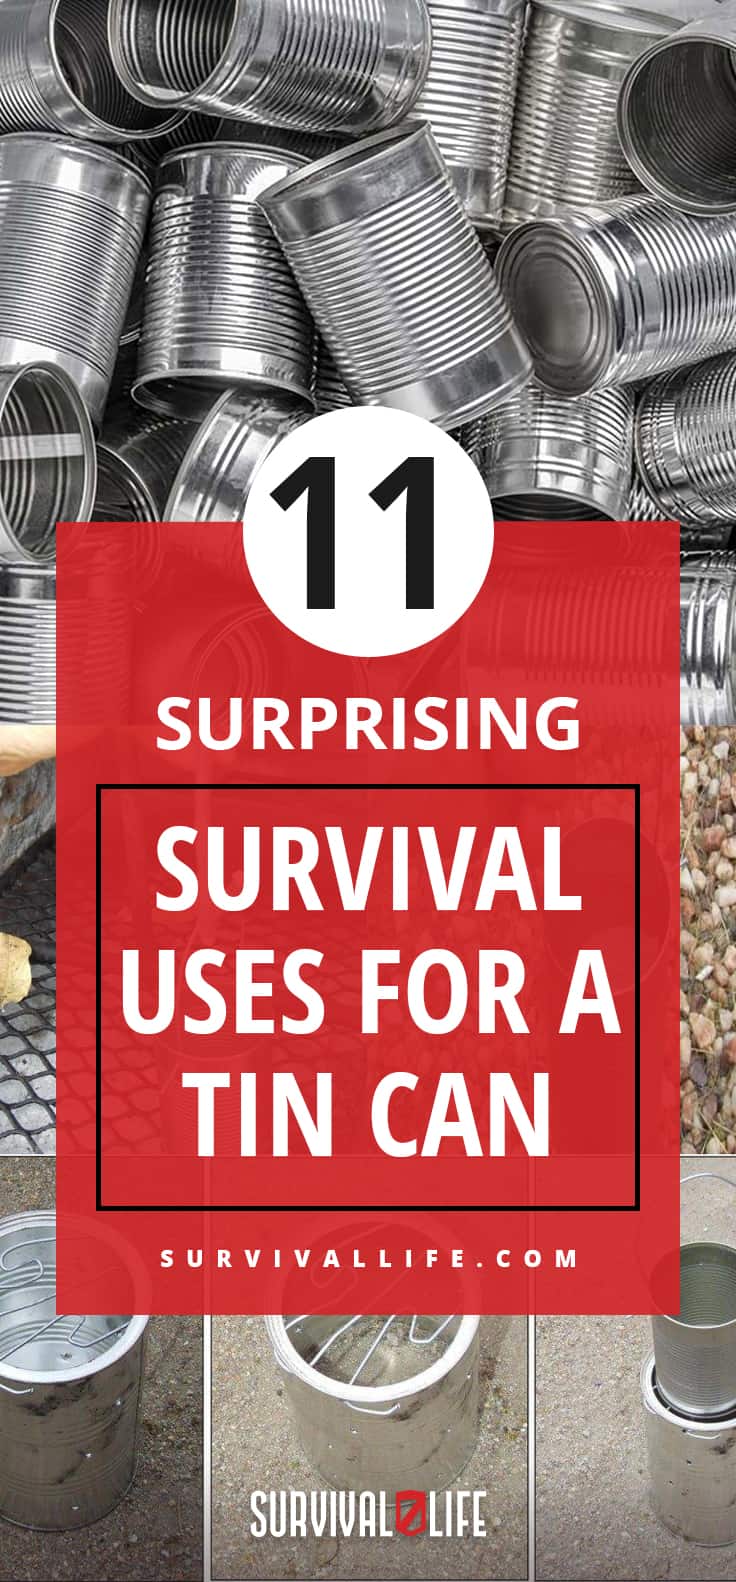 Surprising Survival Uses For A Tin Can | http://survivallife.com/survival-uses-for-tin-can/